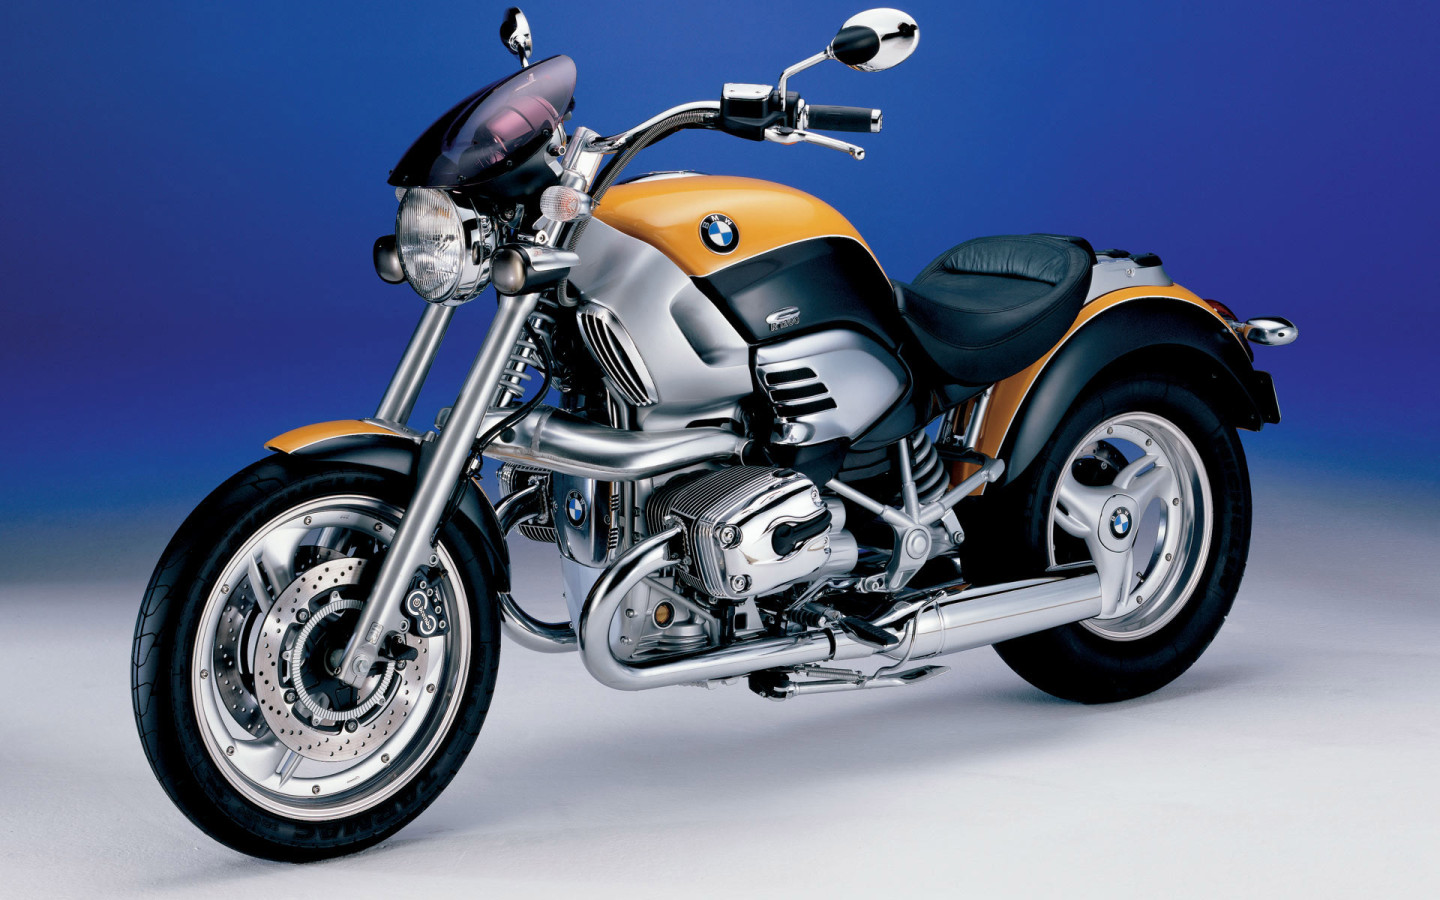 Bmw Motorcycles Pictures And Wallpapers - 2006 Bmw 1200 C , HD Wallpaper & Backgrounds